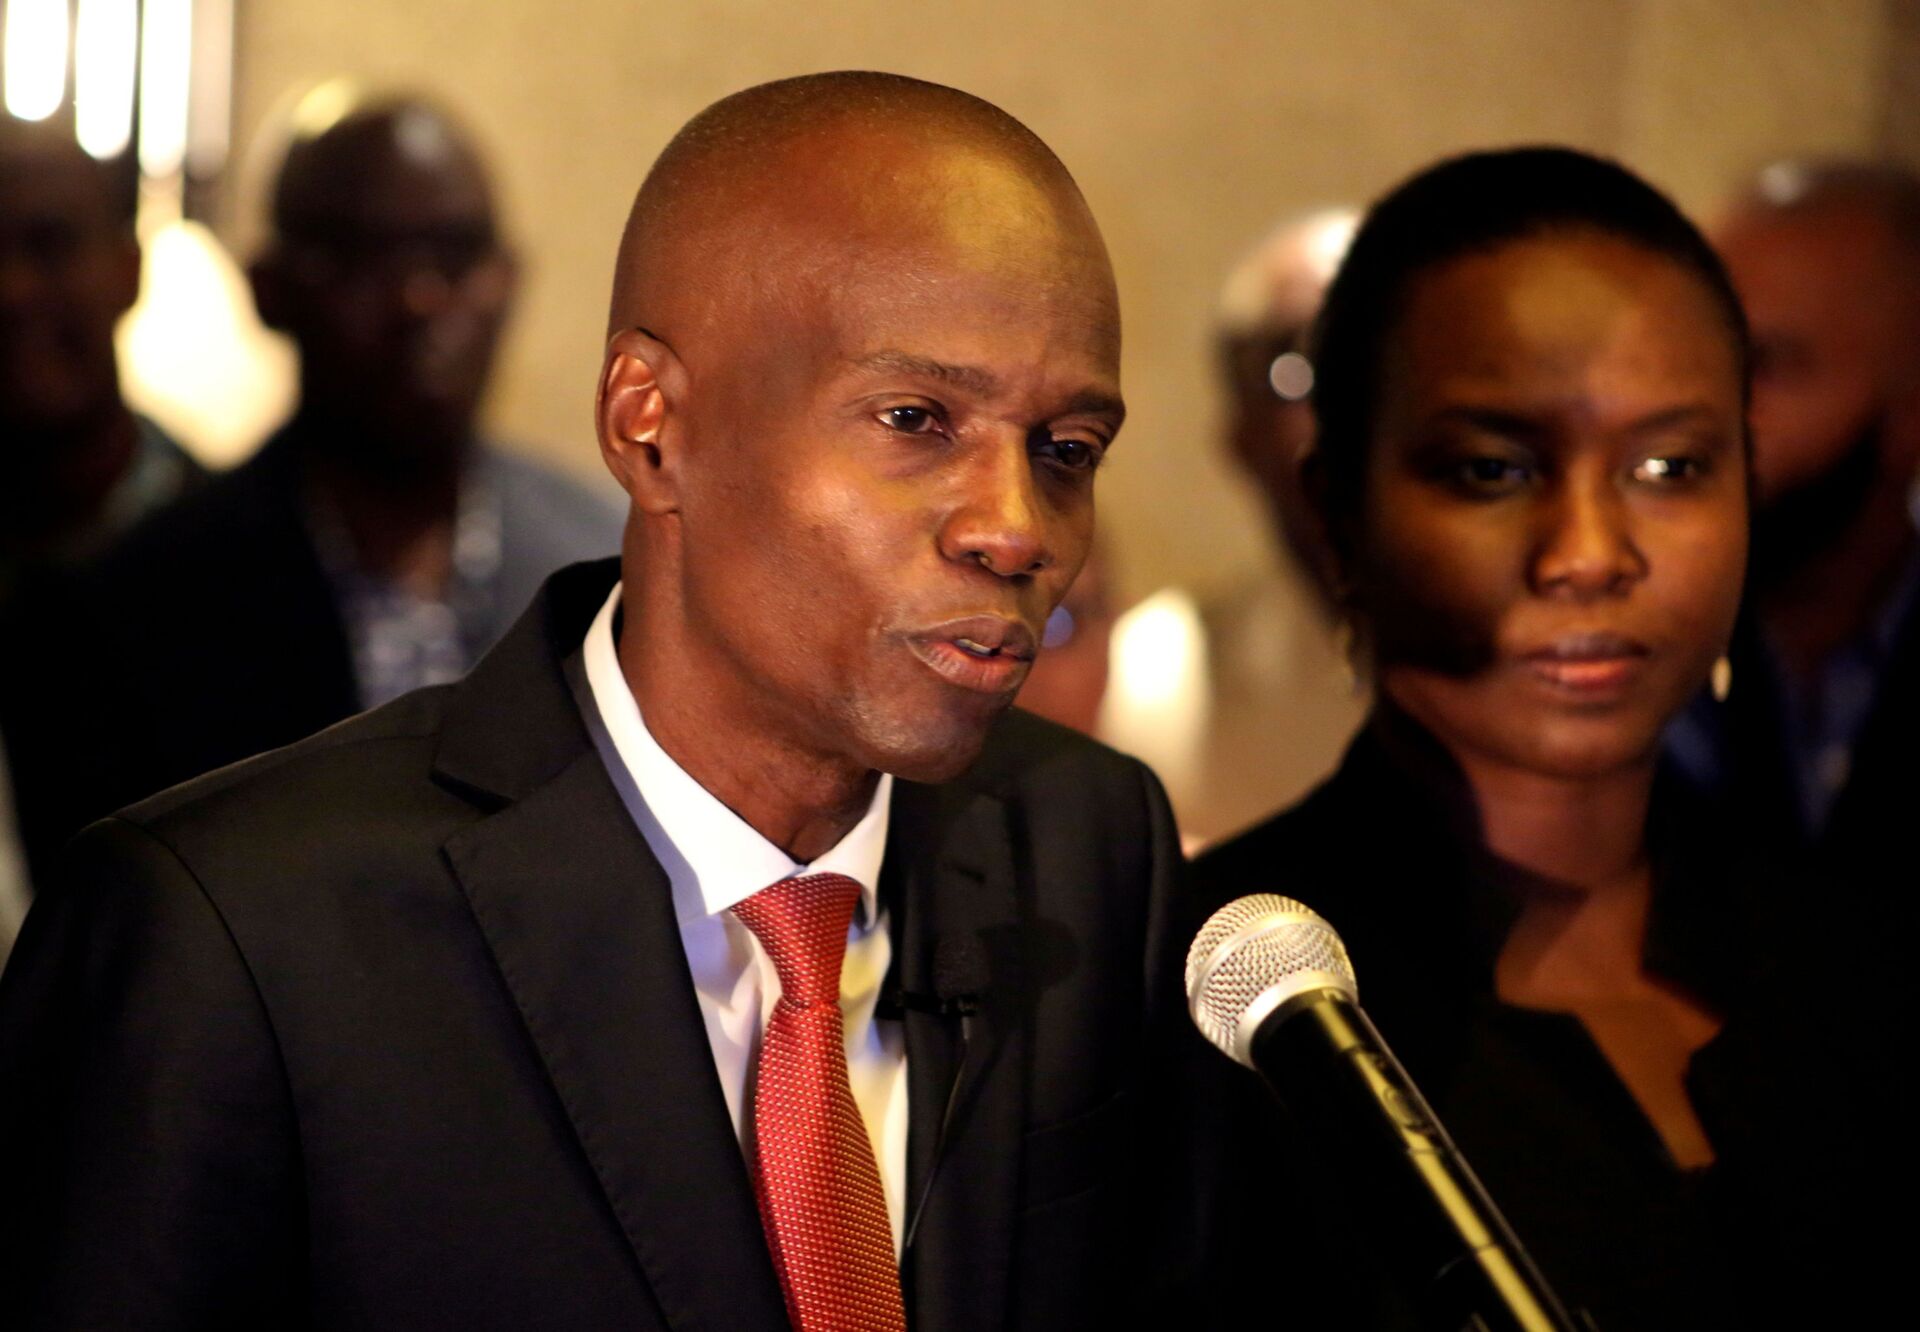 FILE PHOTO: Jovenel Moise addresses the media next to his wife Martine after winning the 2016 presidential election, in Port-au-Prince, Haiti. Picture taken November 28, 2016 - Sputnik International, 1920, 18.11.2021